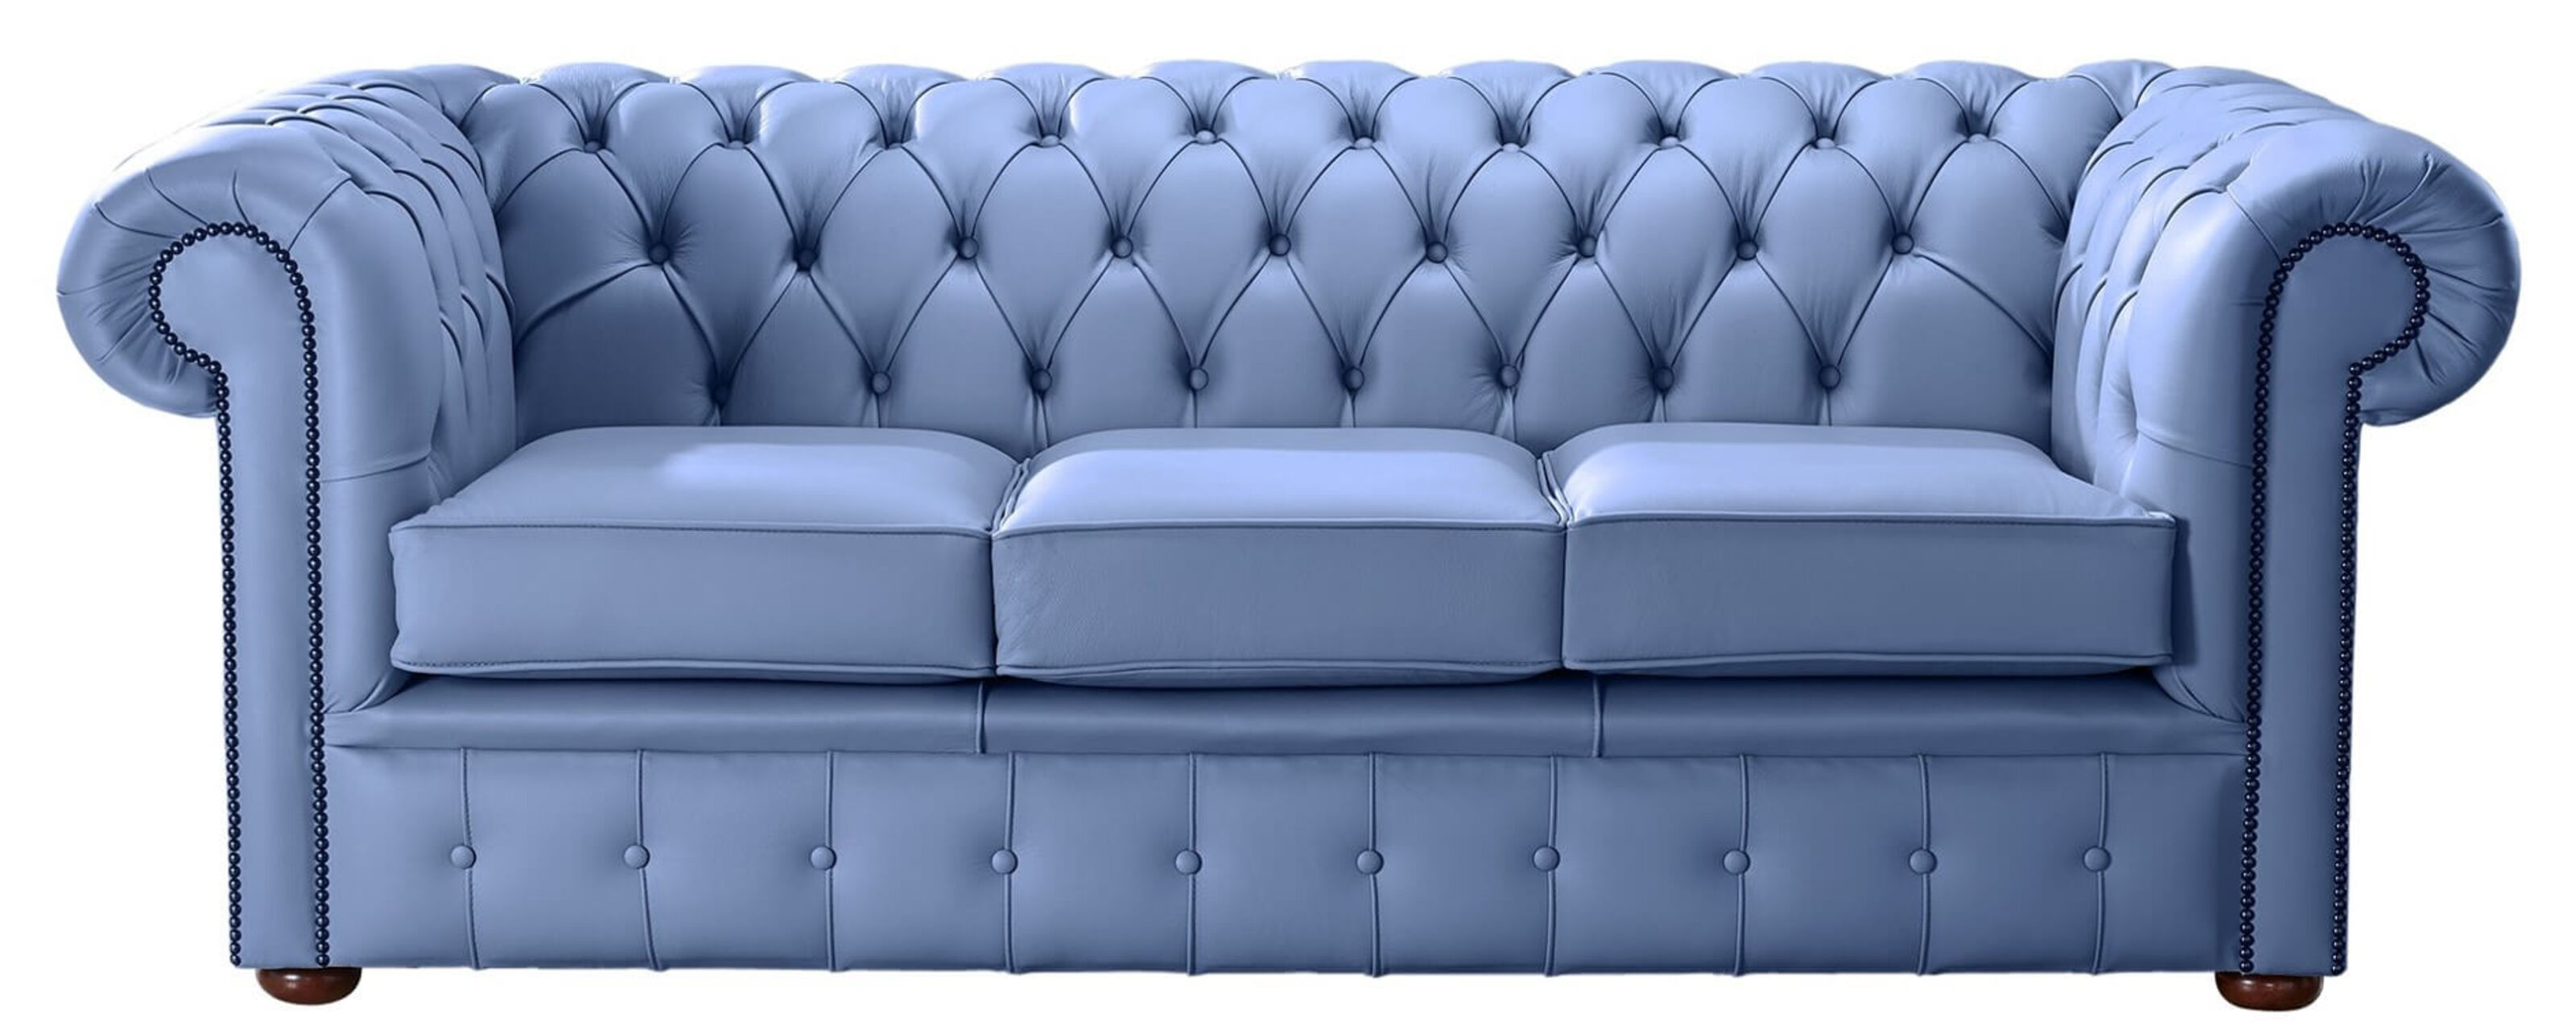 Decking Out Your Living Room with Chesterfield Queen Anne Style  %Post Title